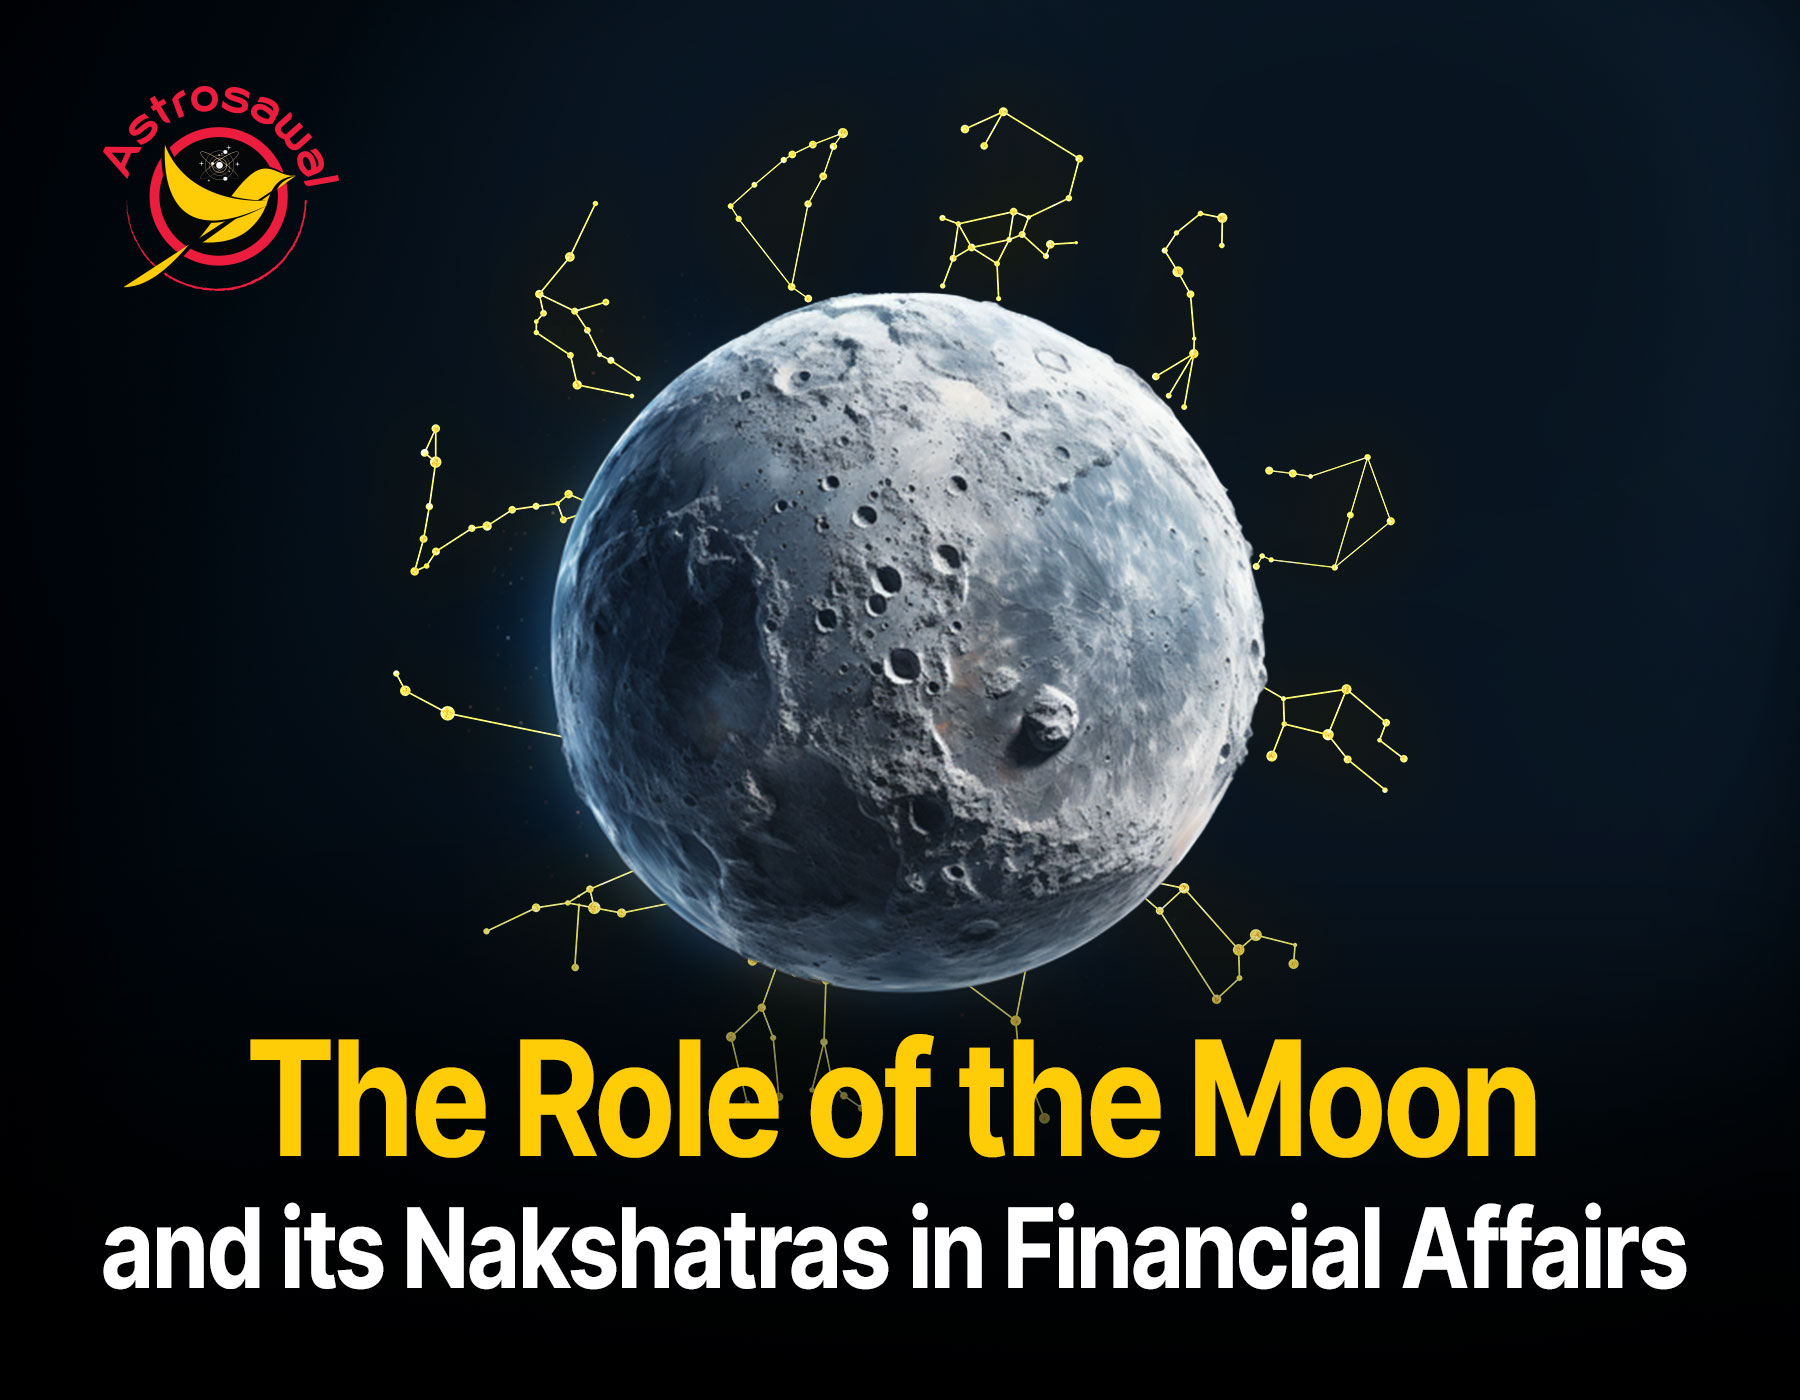 The Role of the Moon and its Nakshatras in Financial Affairs